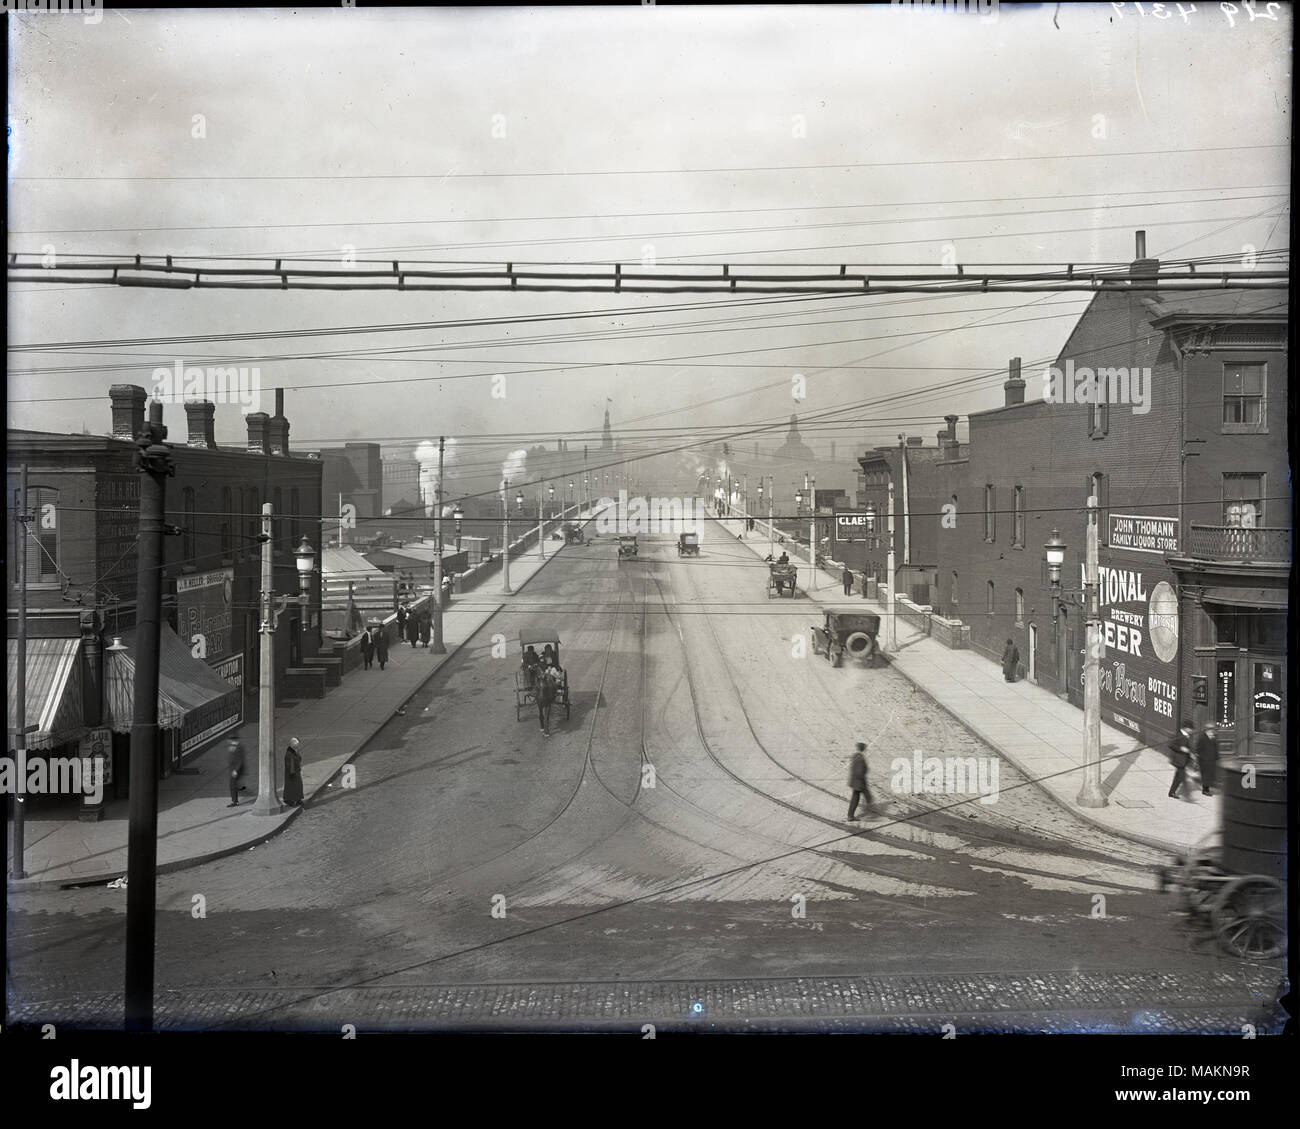 Horizontal, black and white photograph showing a bird's eye view of the intersection of 12th Street and Chouteau. The view looks down 12th Street, later renamed Tucker Boulevard. Several horse drawn wagons and buggies and several cars are driving on 12th Street, which is lightly covered with snow. Pedestrians are walking down the sidewalk and crossing the street. J. H. Heller, druggist, is on the left, probably at 1201 Chouteau. John Thomann, family liquor store, is on the right, probably at 1113 or 1114 Chouteau. Title: Bird's eye view of the intersection of 12th Street and Chouteau.  . betwe Stock Photo